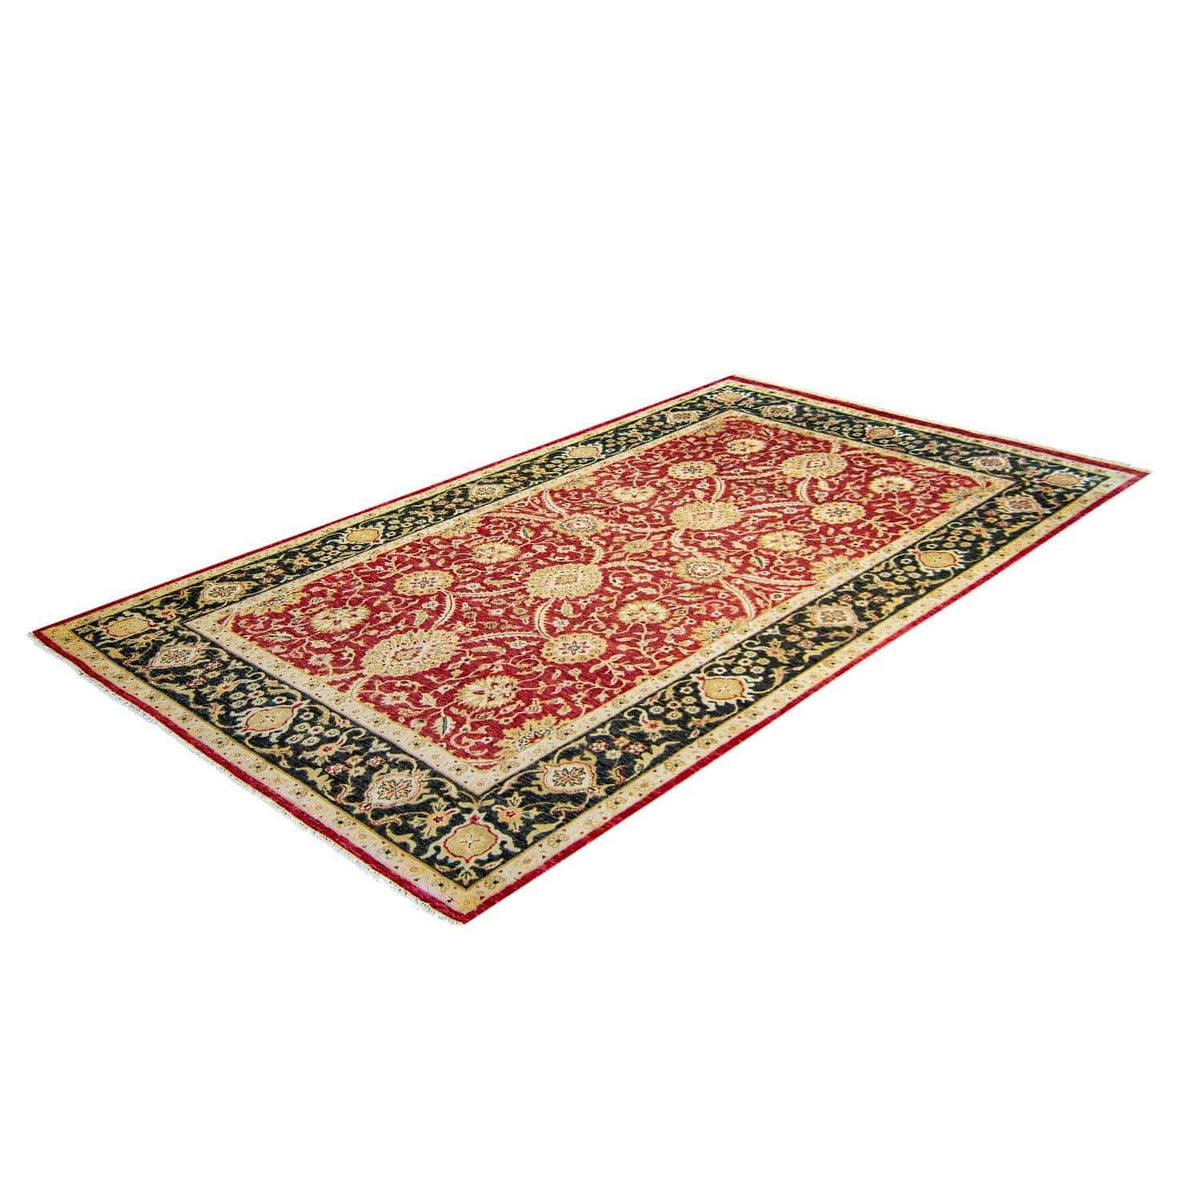 Fine Traditional Hand-knotted Wool Rug 183cm x 274cm